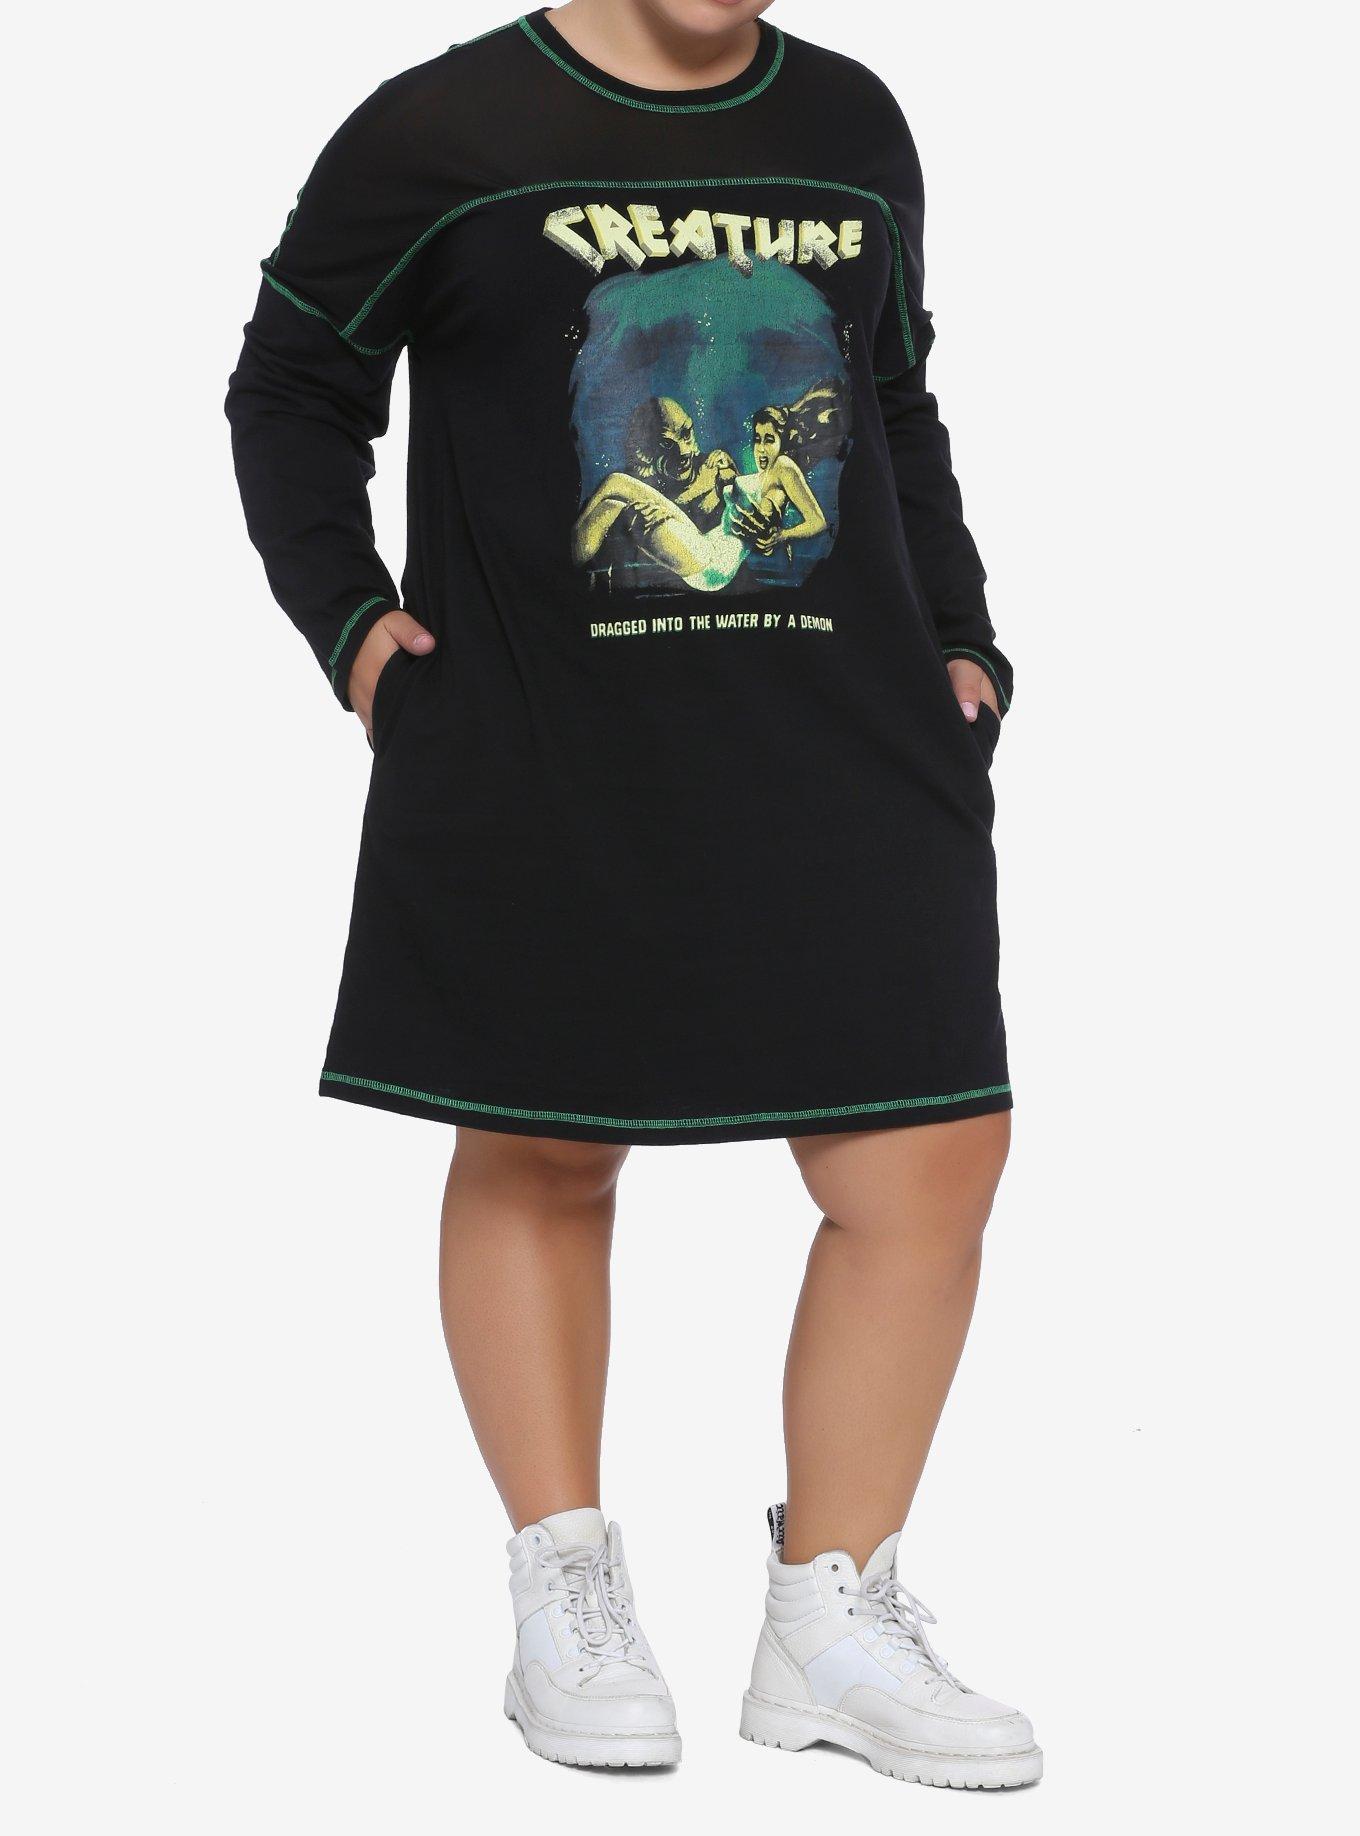 Universal Monsters Creature From The Black Lagoon Long-Sleeve T-Shirt Dress Plus Size, MULTI, alternate